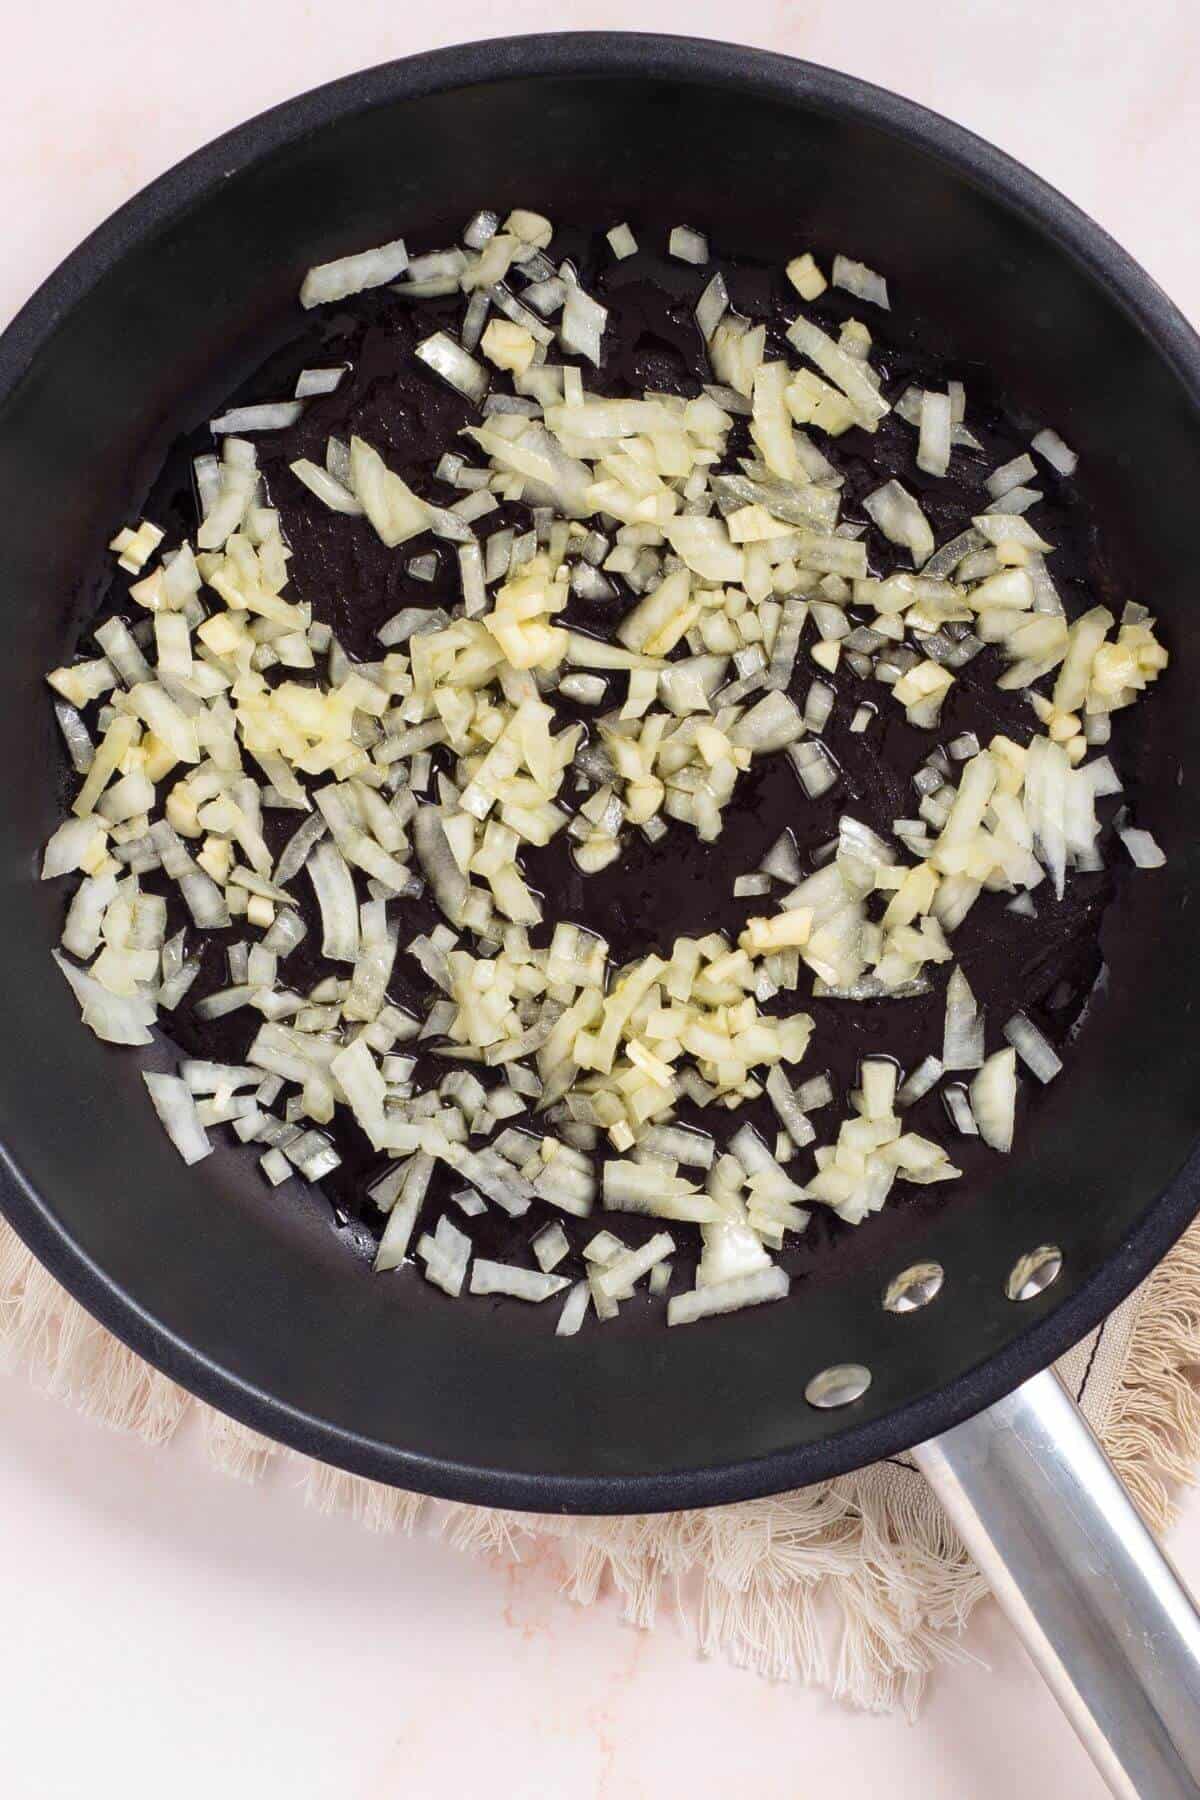 Sautéed onions and garlic in skillet.